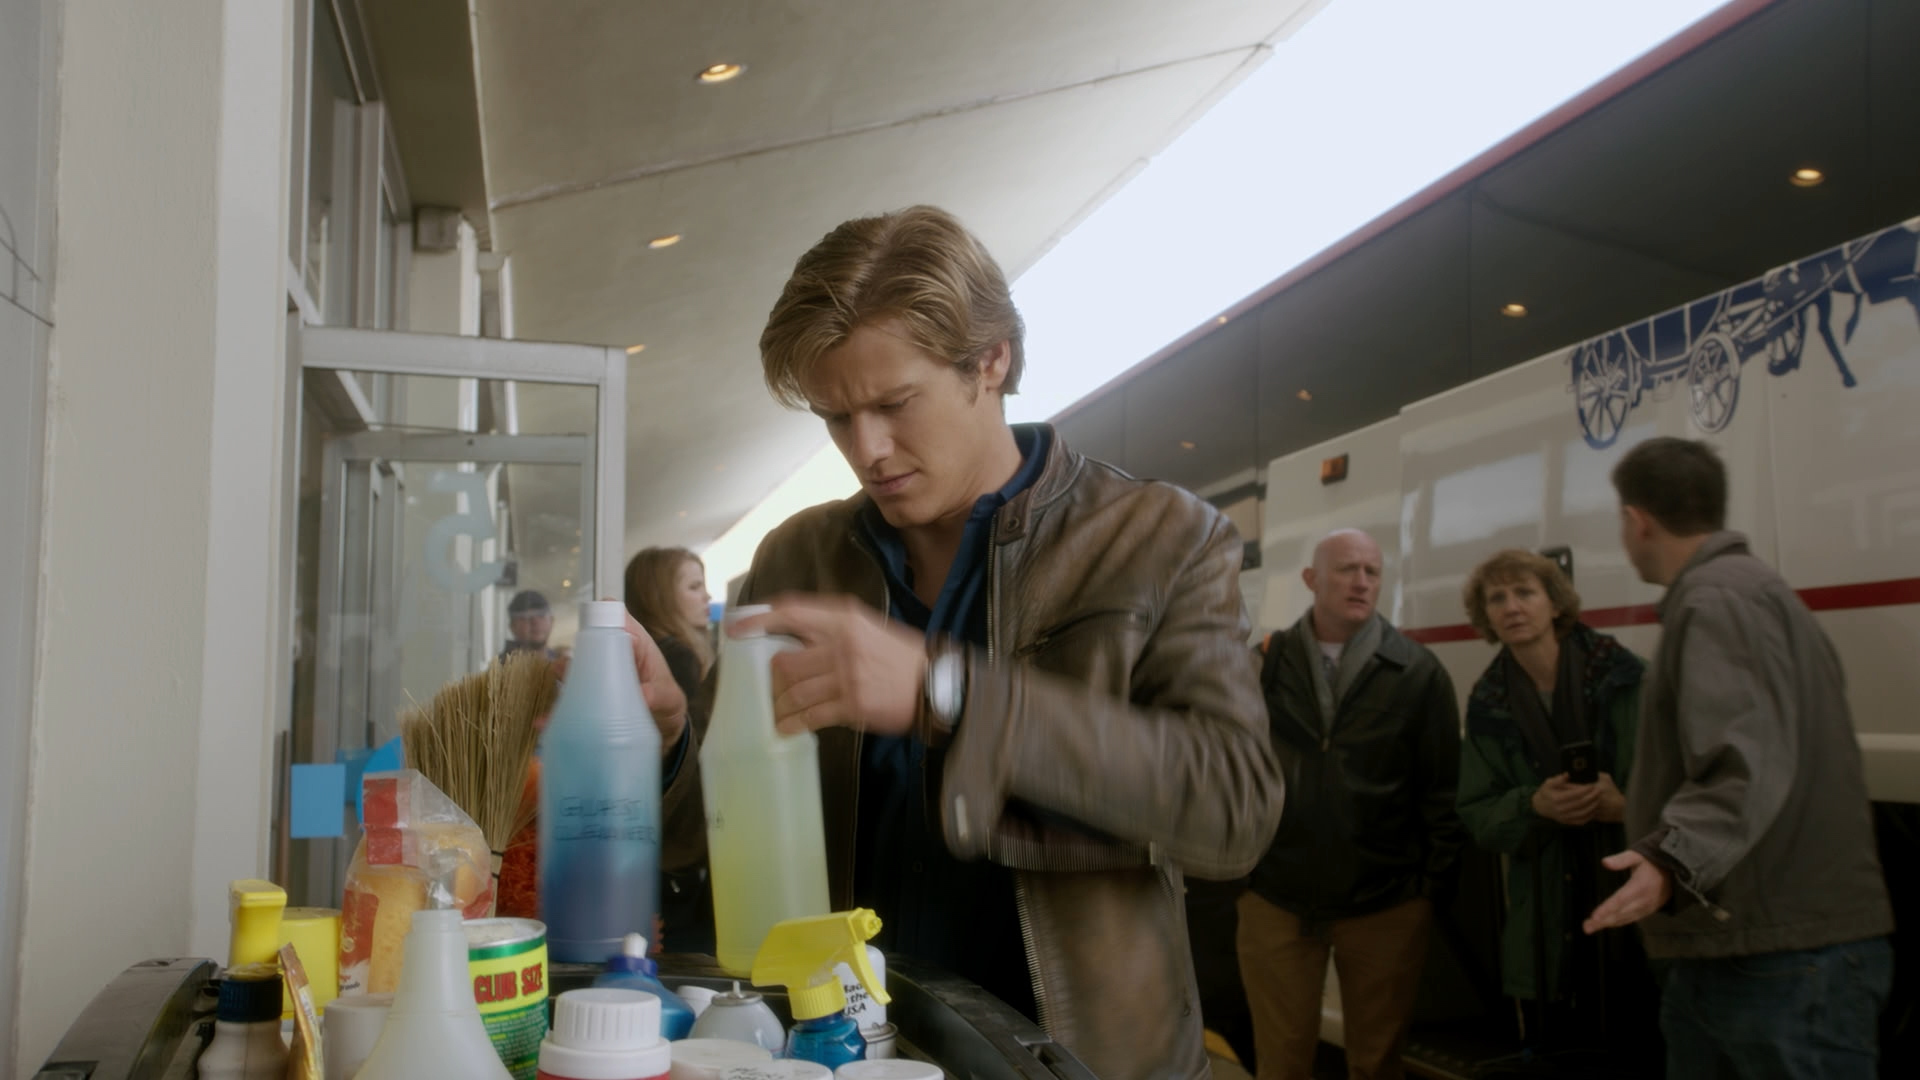 MacGyver rummages through cleaning products.